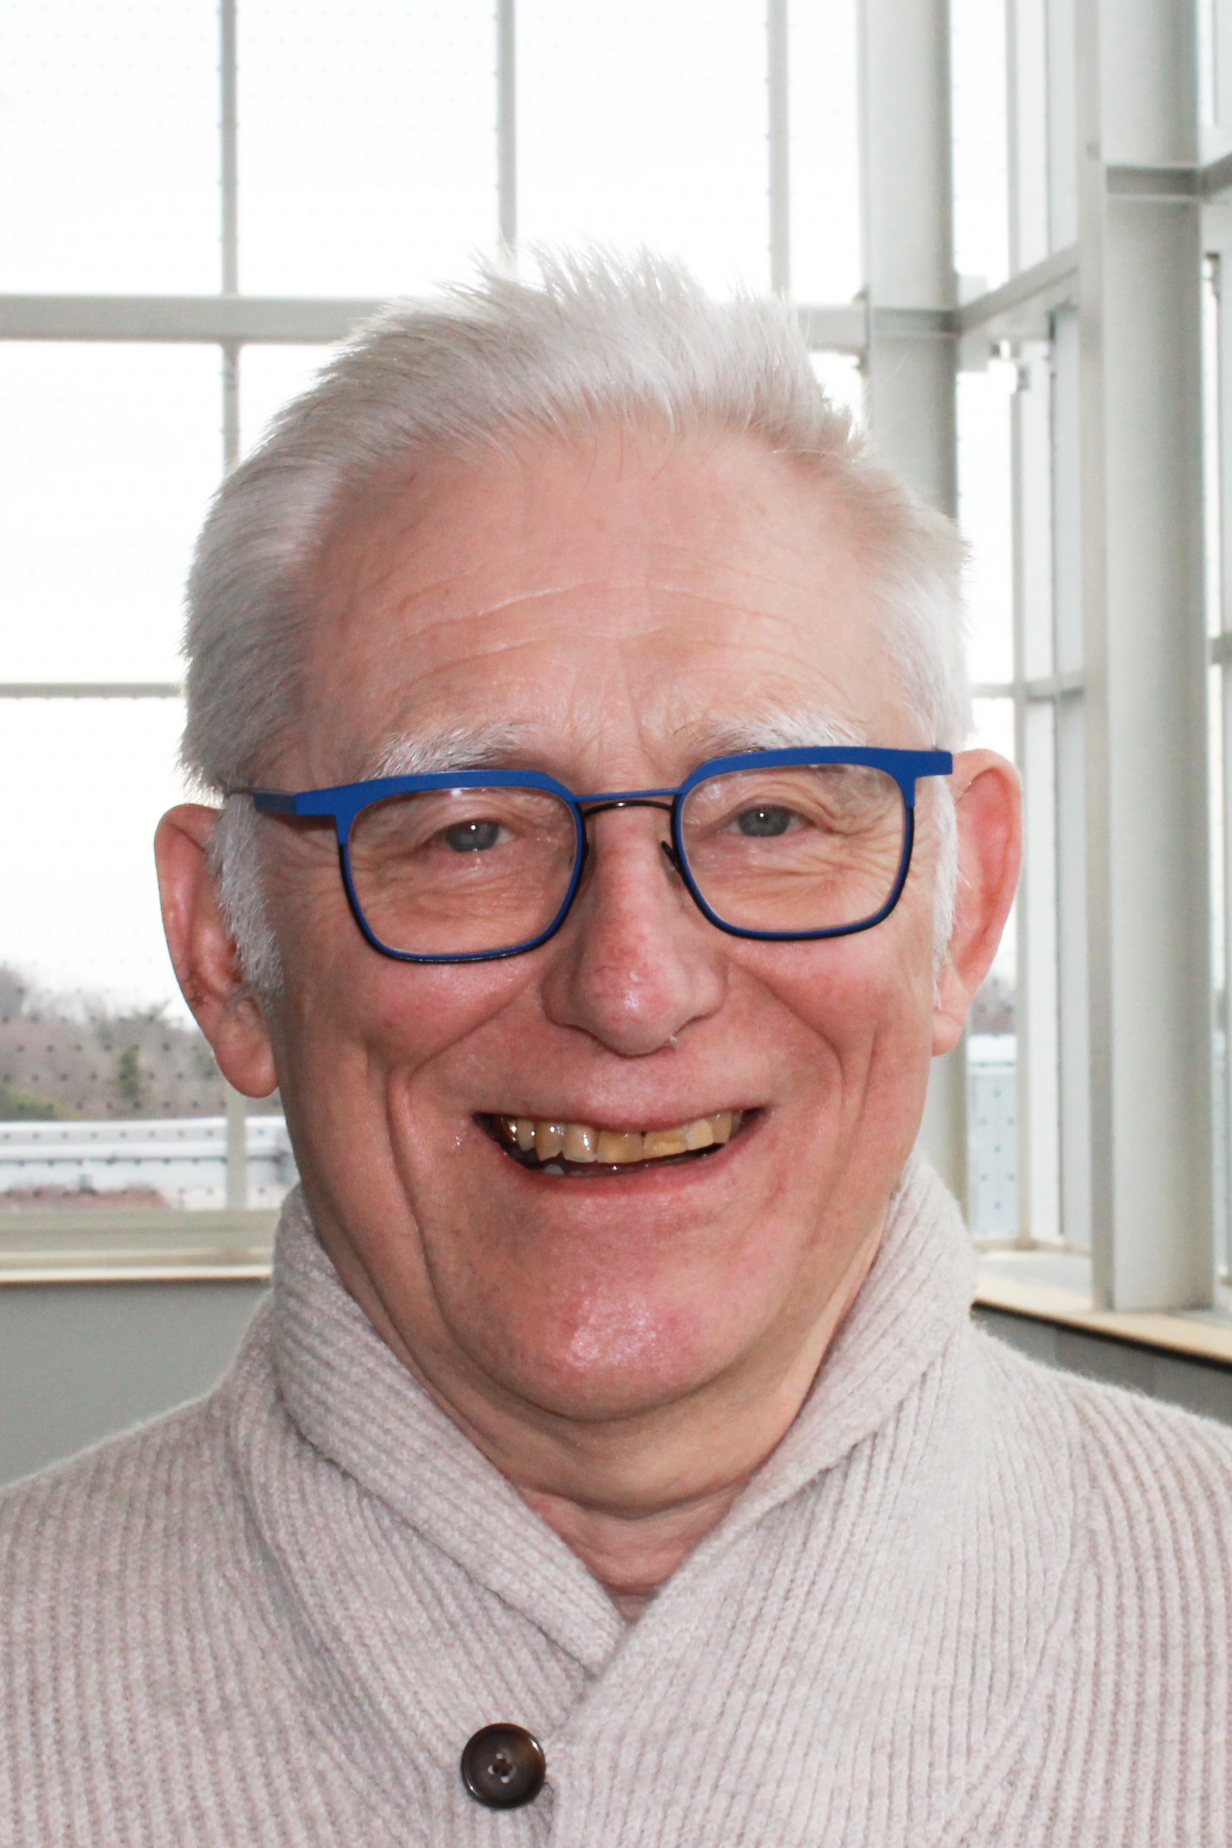 John Hannigan, a man with white hair and glasses